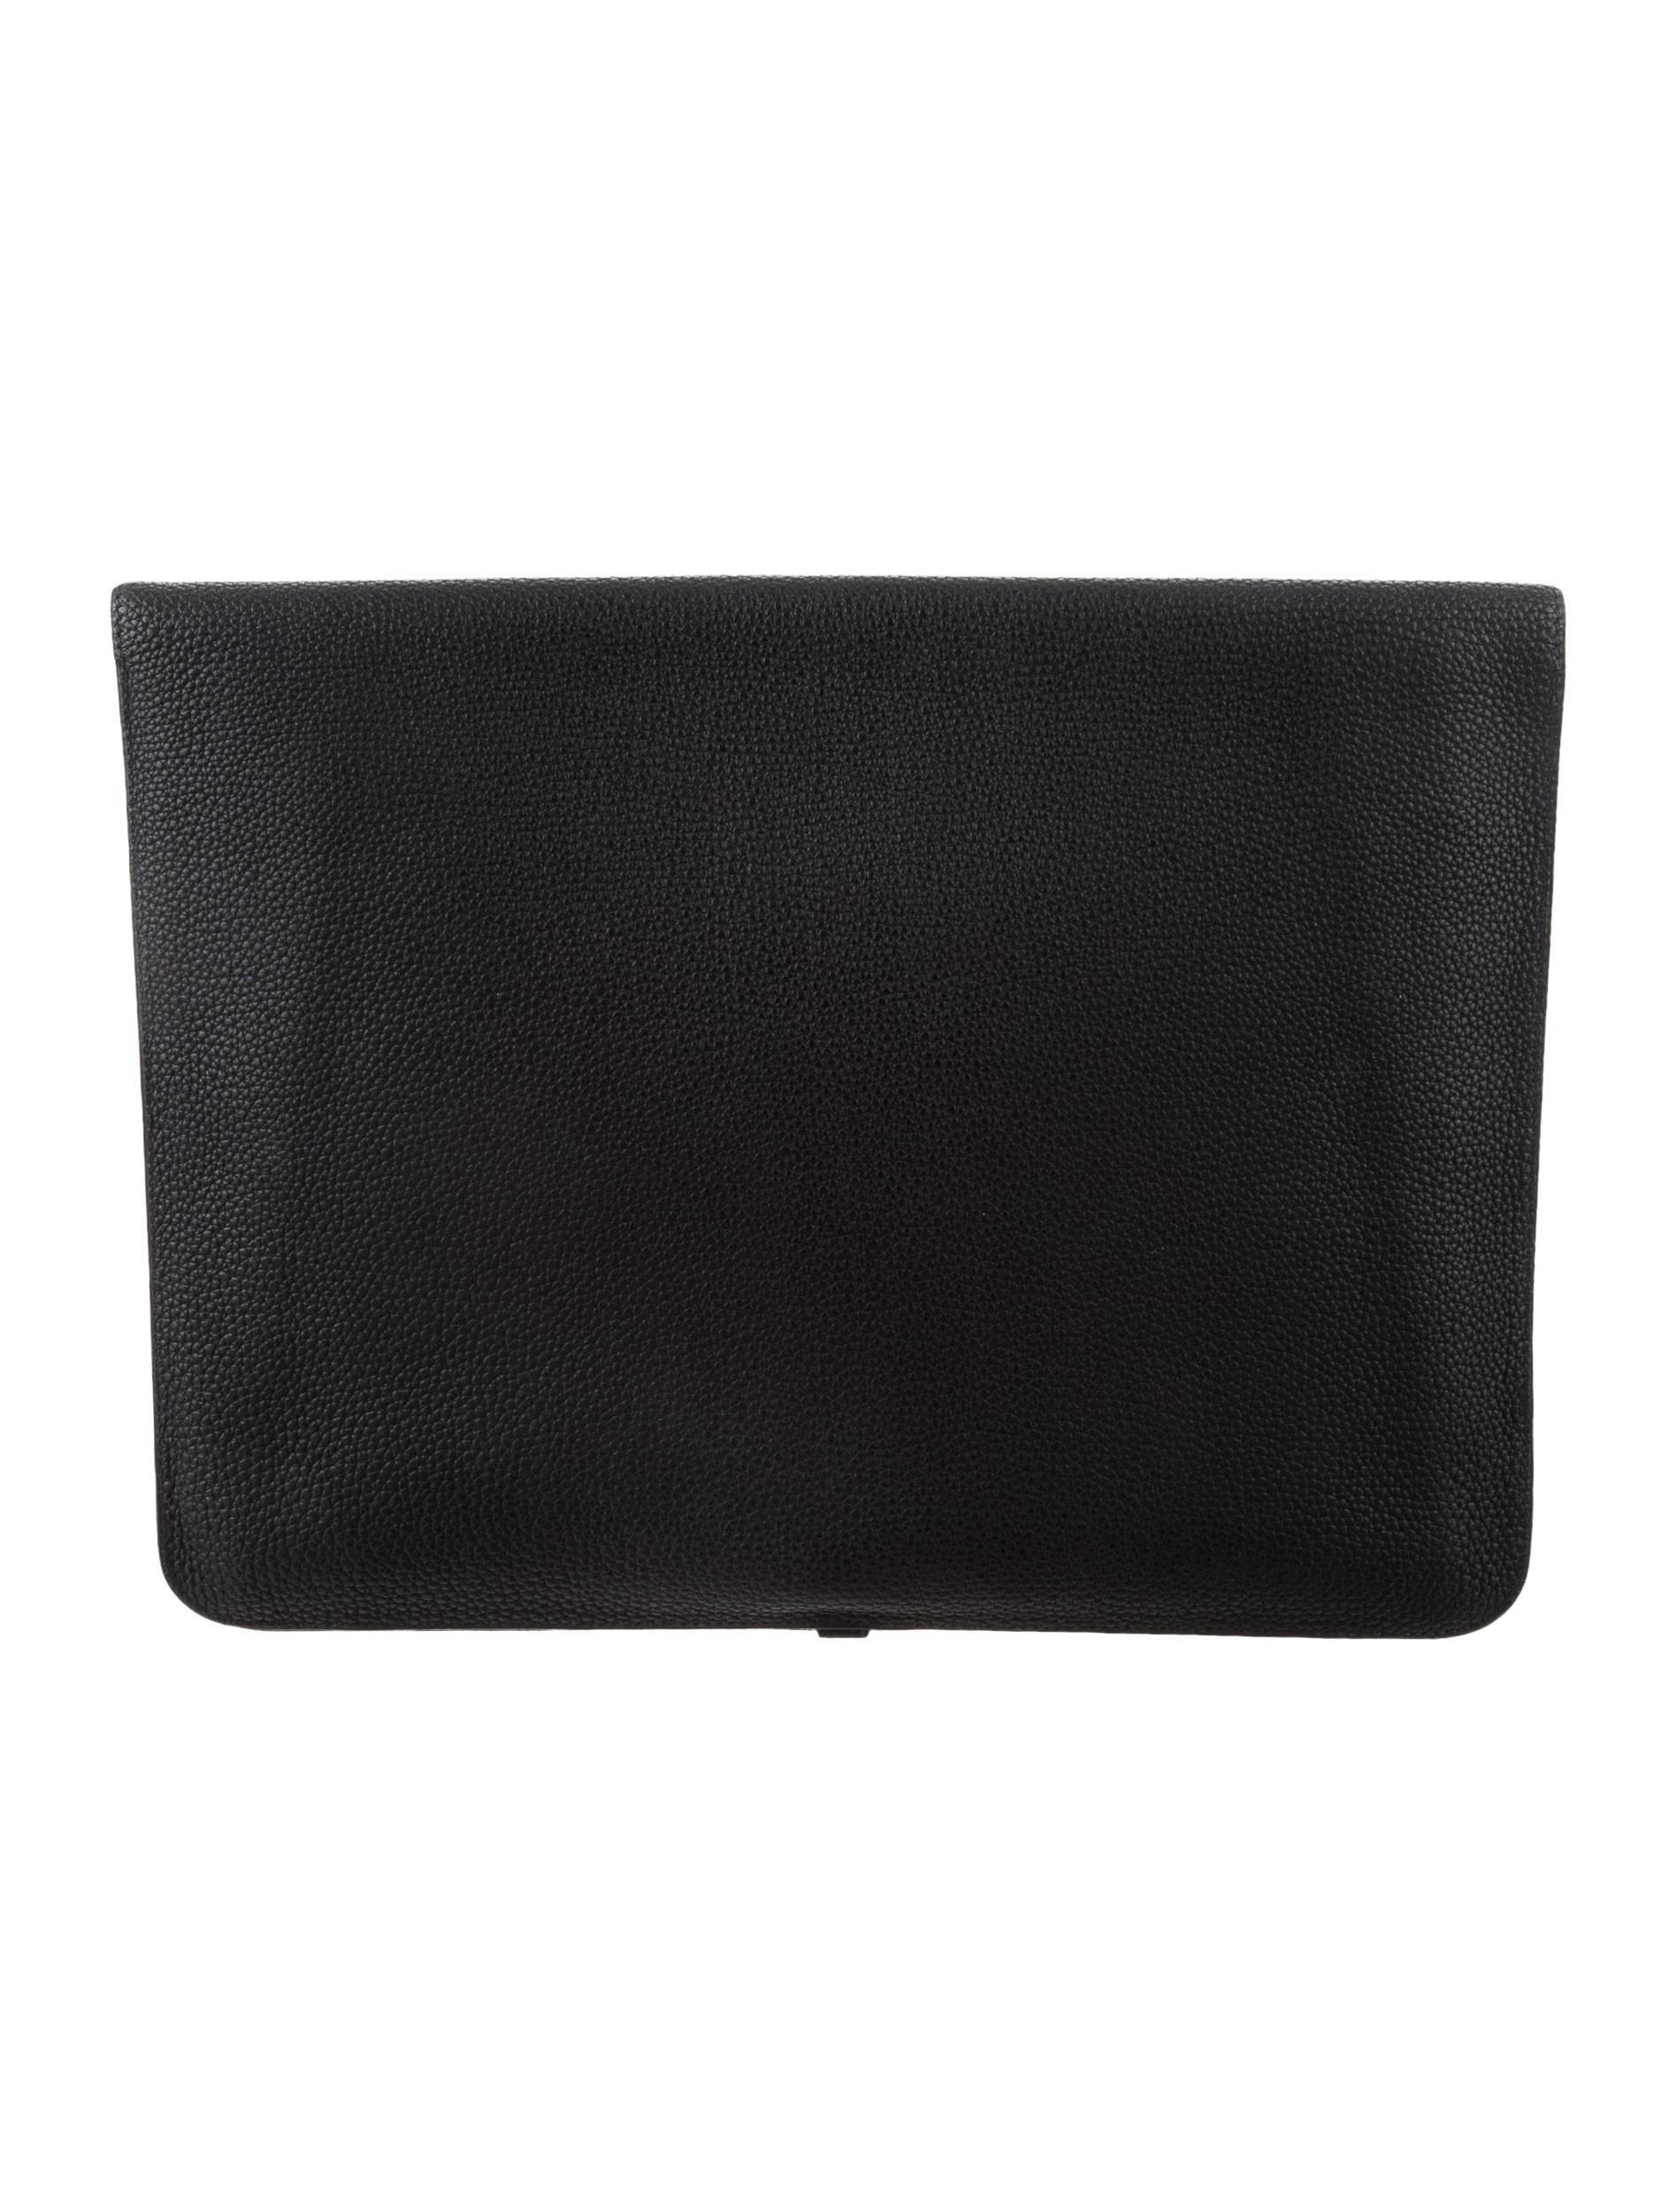 Hermes Black Leather Gold Large LapTop Business Envelope Clutch CarryAll Bag  

Your next important meeting? Guaranteed confidence with Hermes at your side.  

Leather 
Gold hardware 
Buckle closure 
Made in France 
Date code present
Measures 14